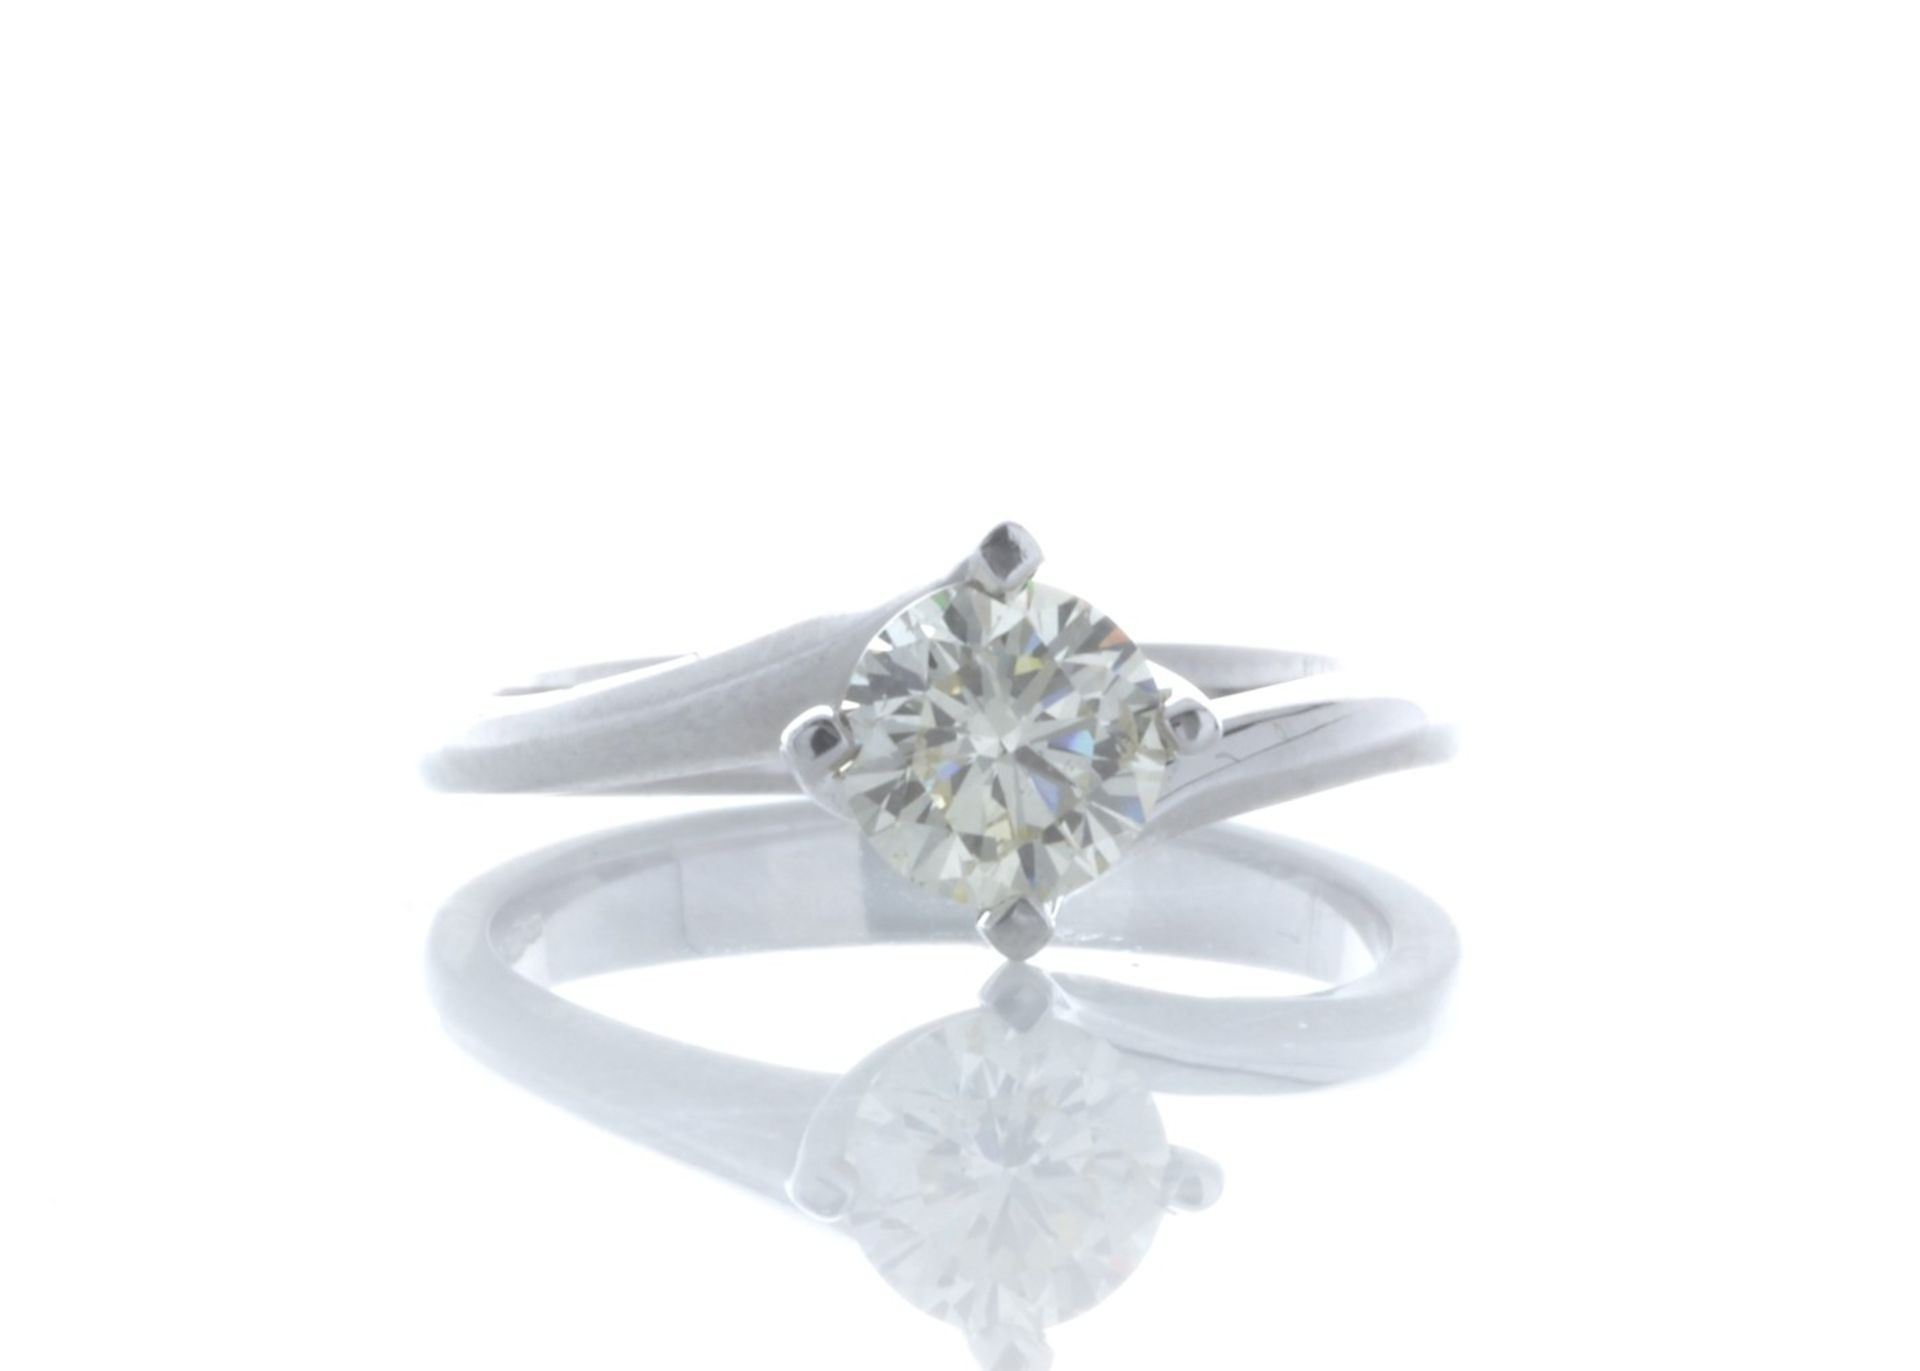 18ct White Gold Single Stone Fancy Claw Set Diamond Ring 0.71 Carats - Valued by IDI £7,250.00 - A